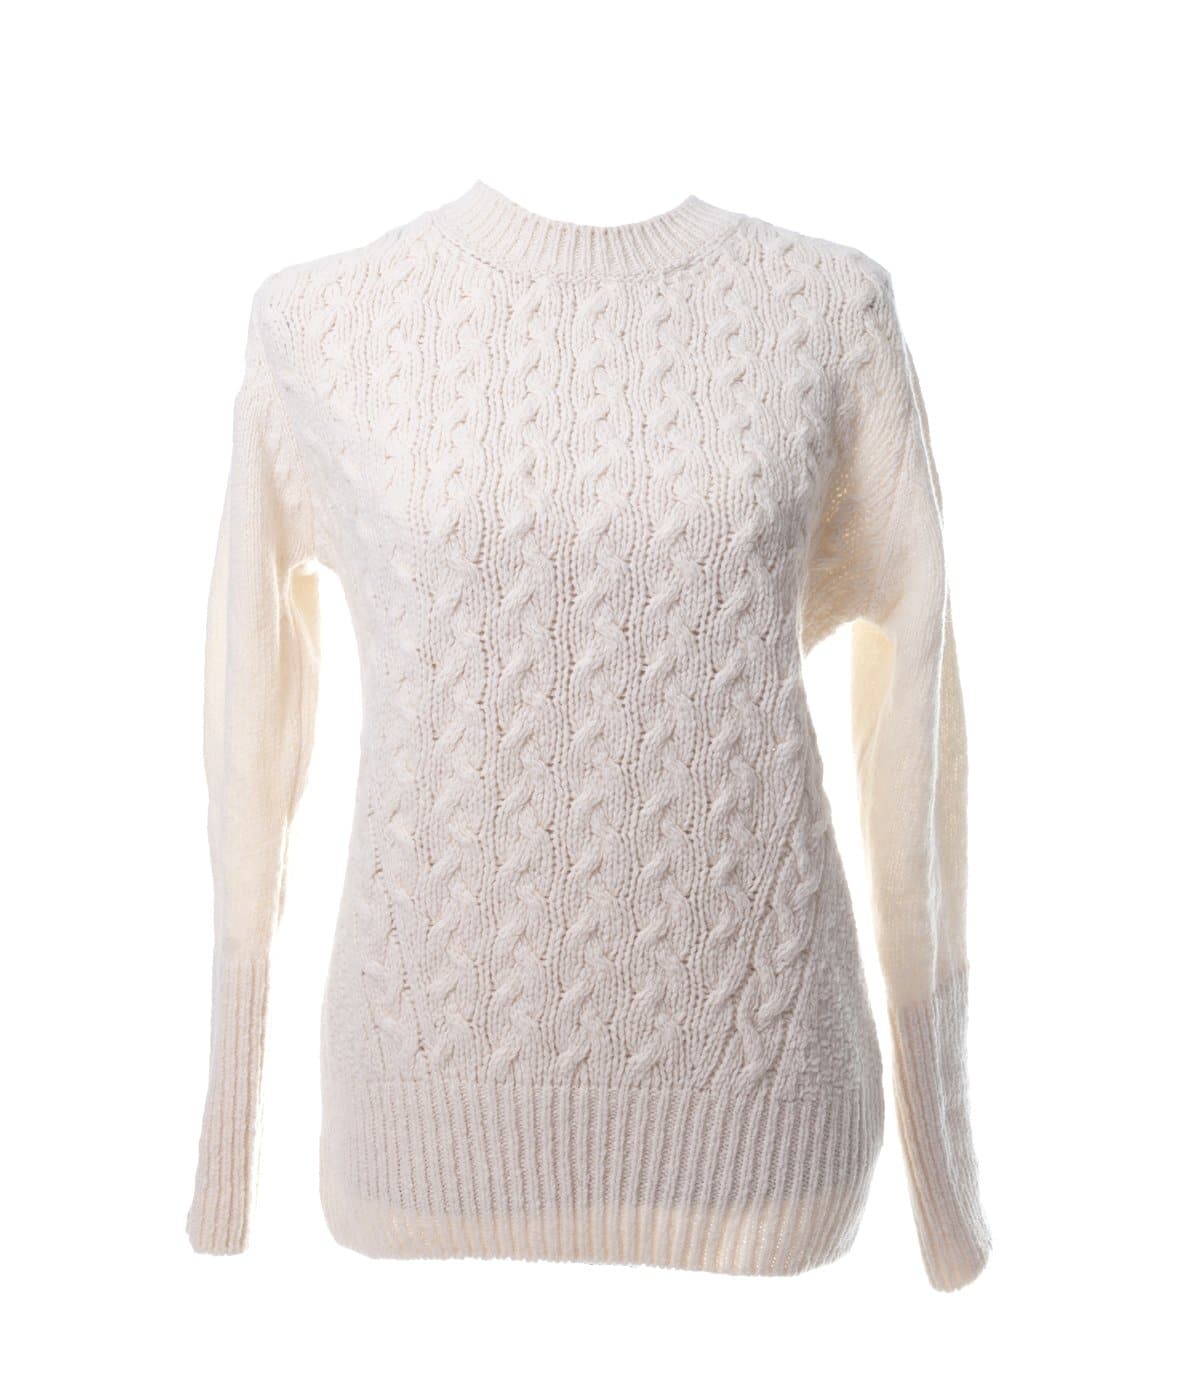 Knitted jumper with cable knit pattern made of soft blended wool